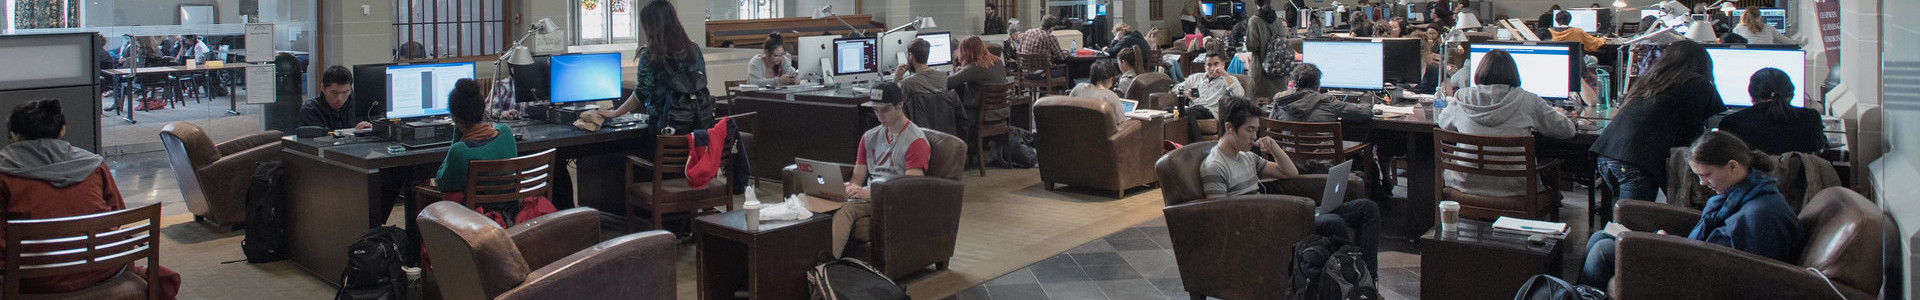 Students studying in the Irving K. Barber Learning Centre